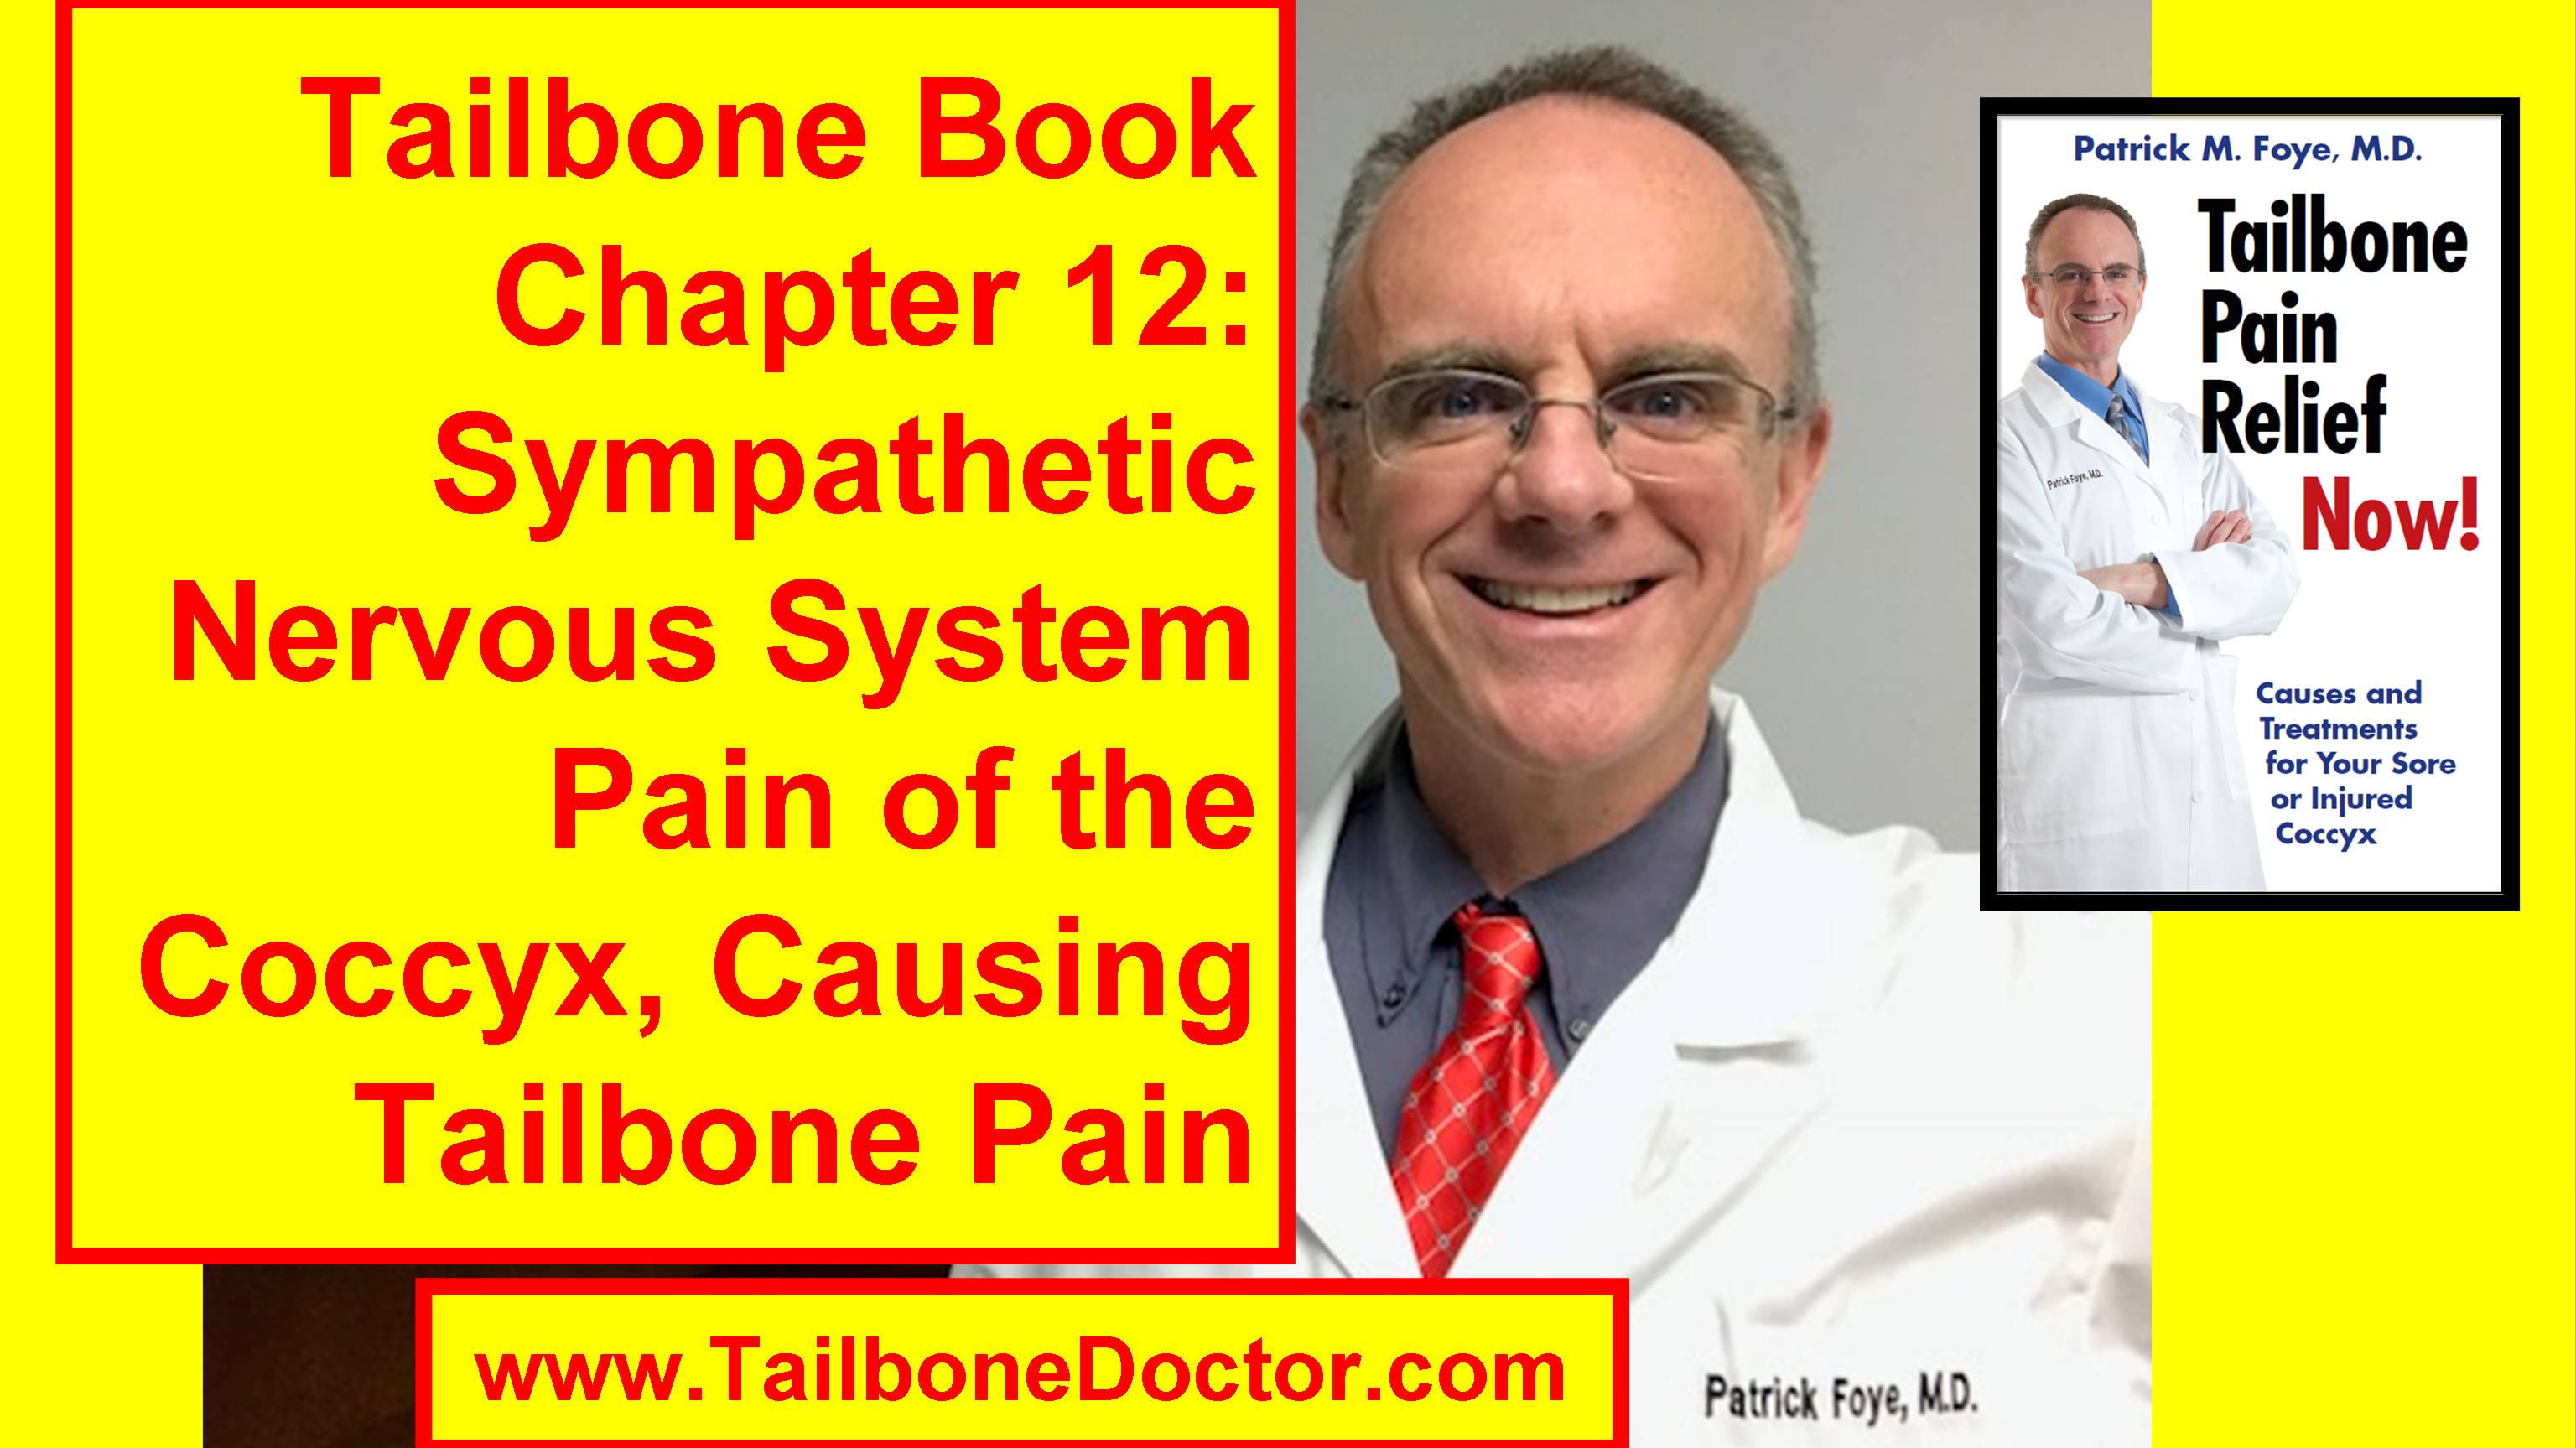 Coccyx Book overview: “Tailbone Pain Relief Now!” Infographic